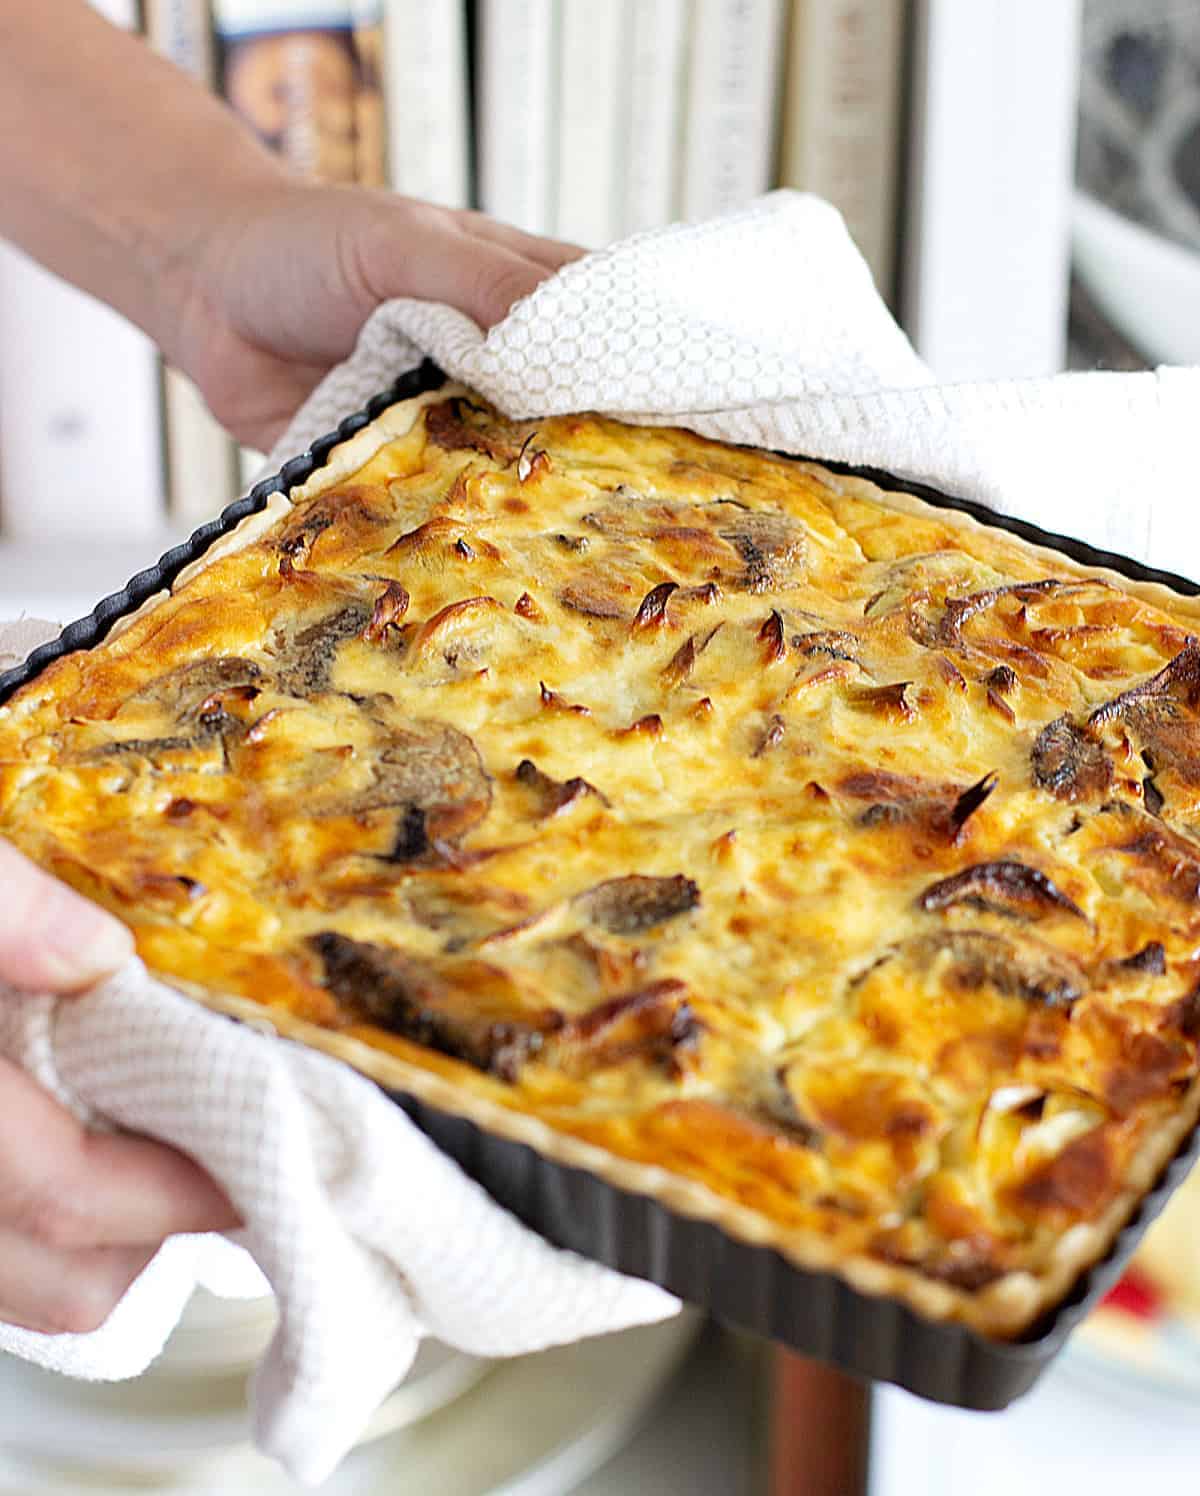 Hands holding square mushroom quiche still in a metal pan.